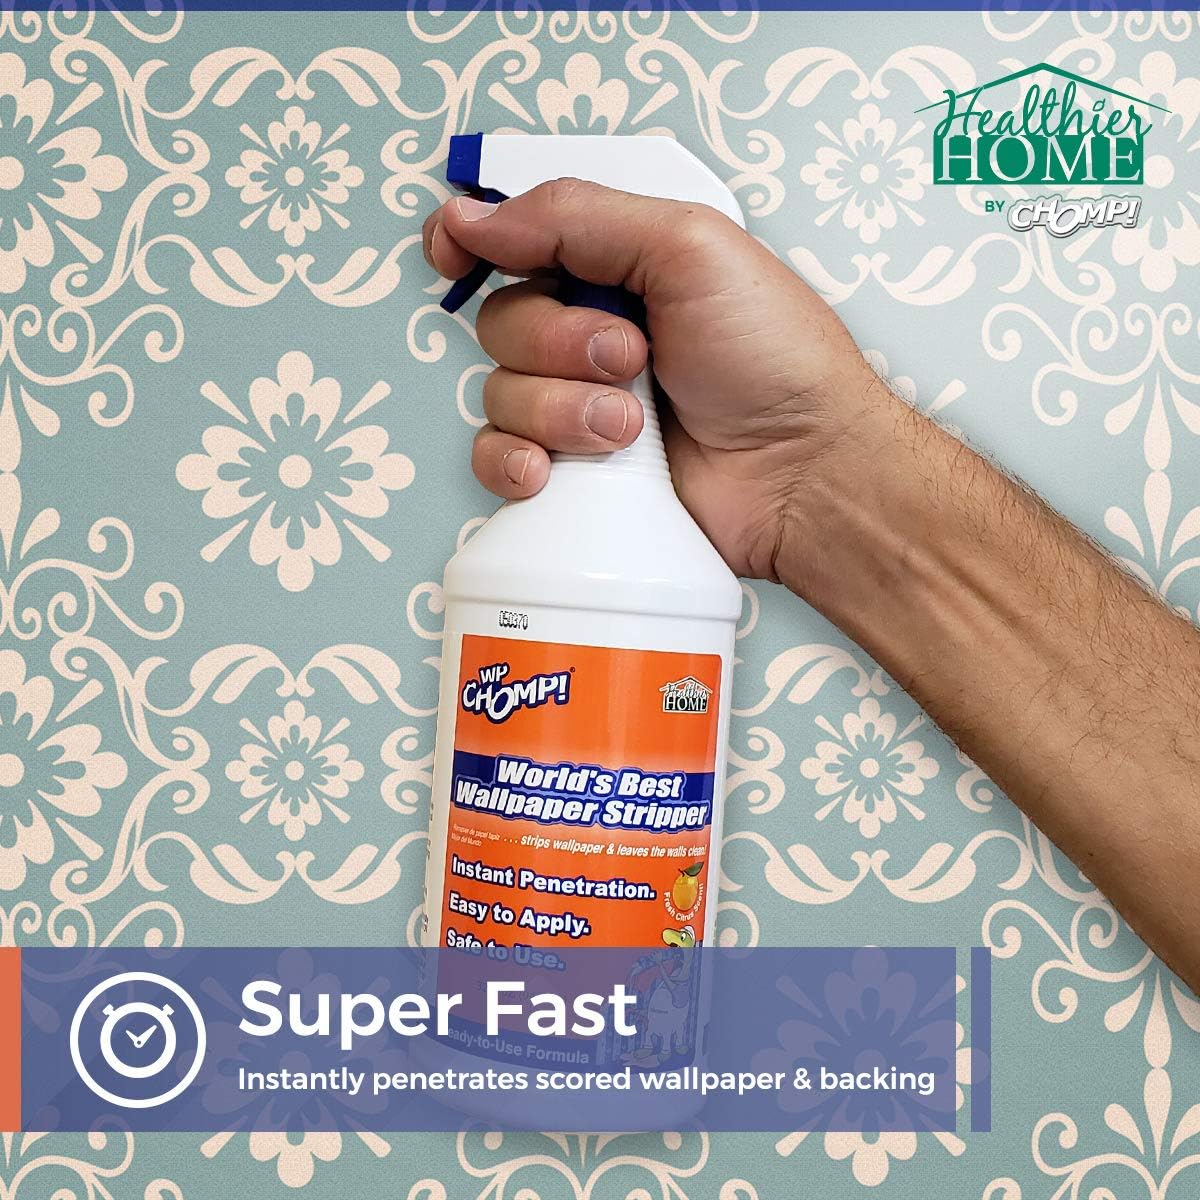 WP Chomp World’s Best Wallpaper Stripper: and Sticky Paste Remover, Citrus Scent 128 fluid ounces